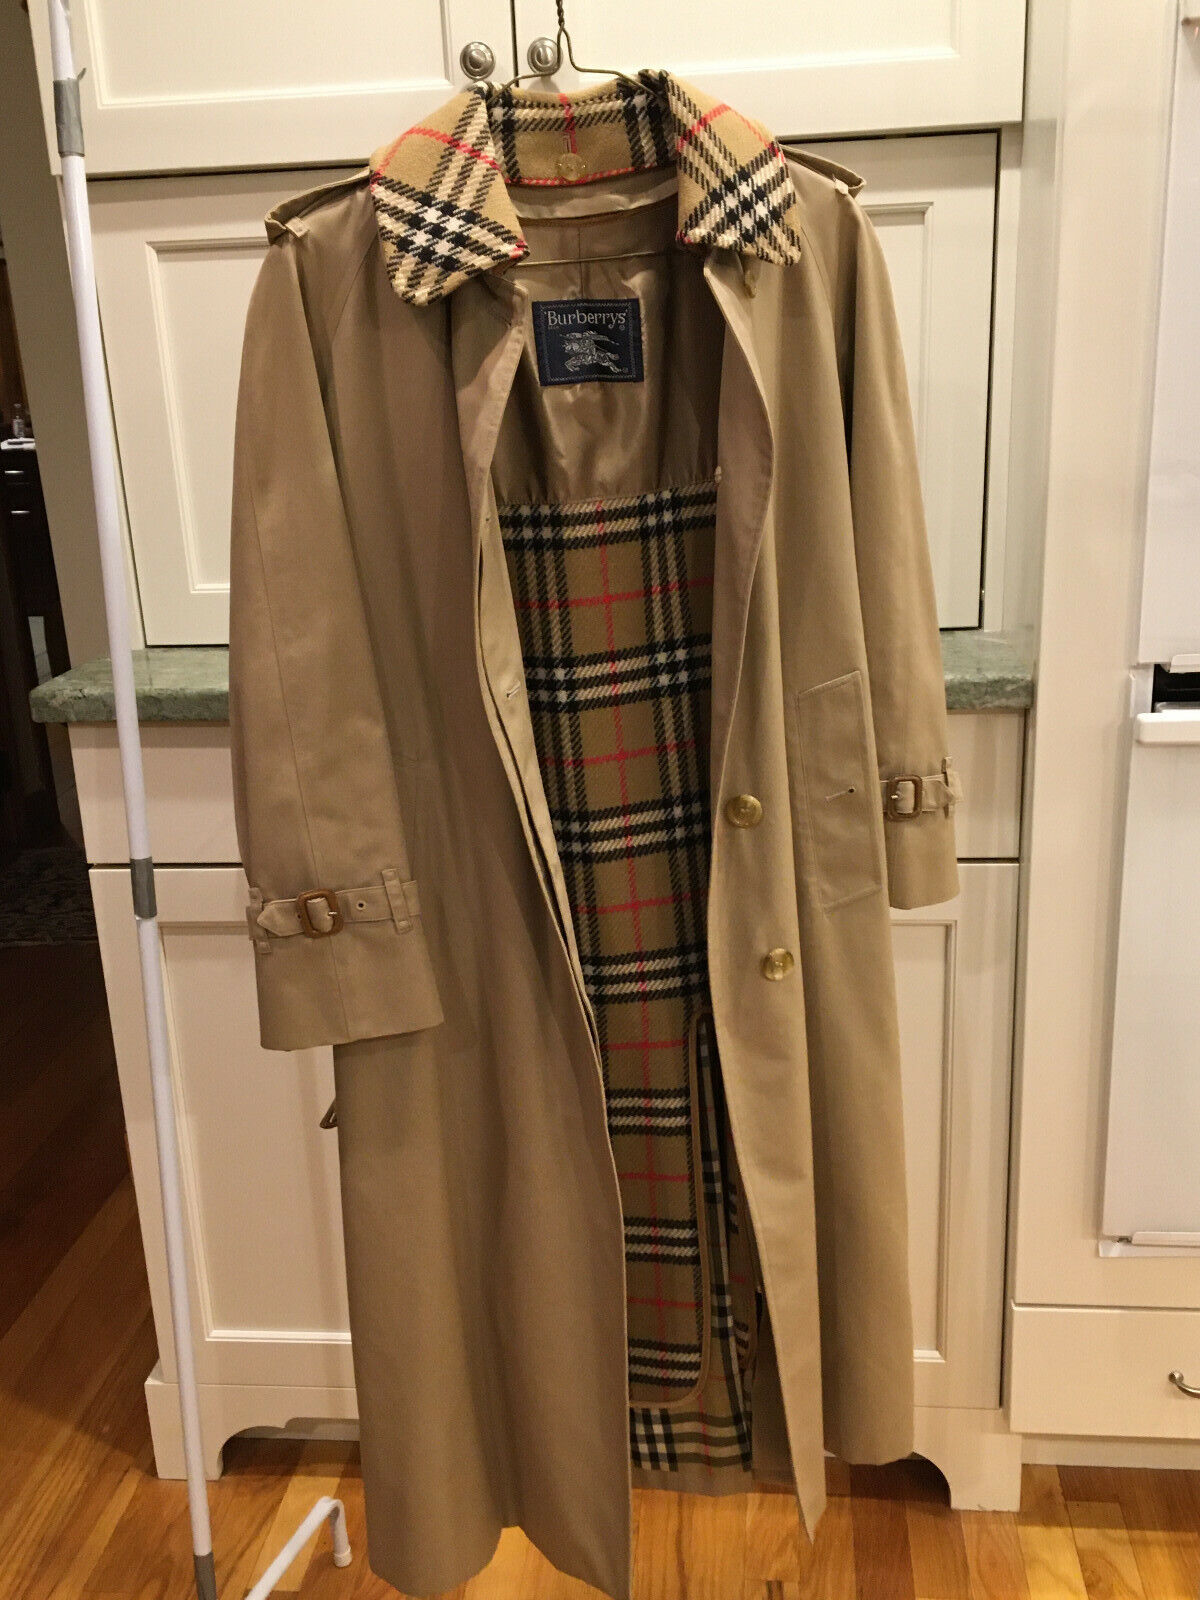 Hoe Ritueel kogel Burberry Women's 4 Petite Vintage Long Trench Coat with removable liner |  eBay